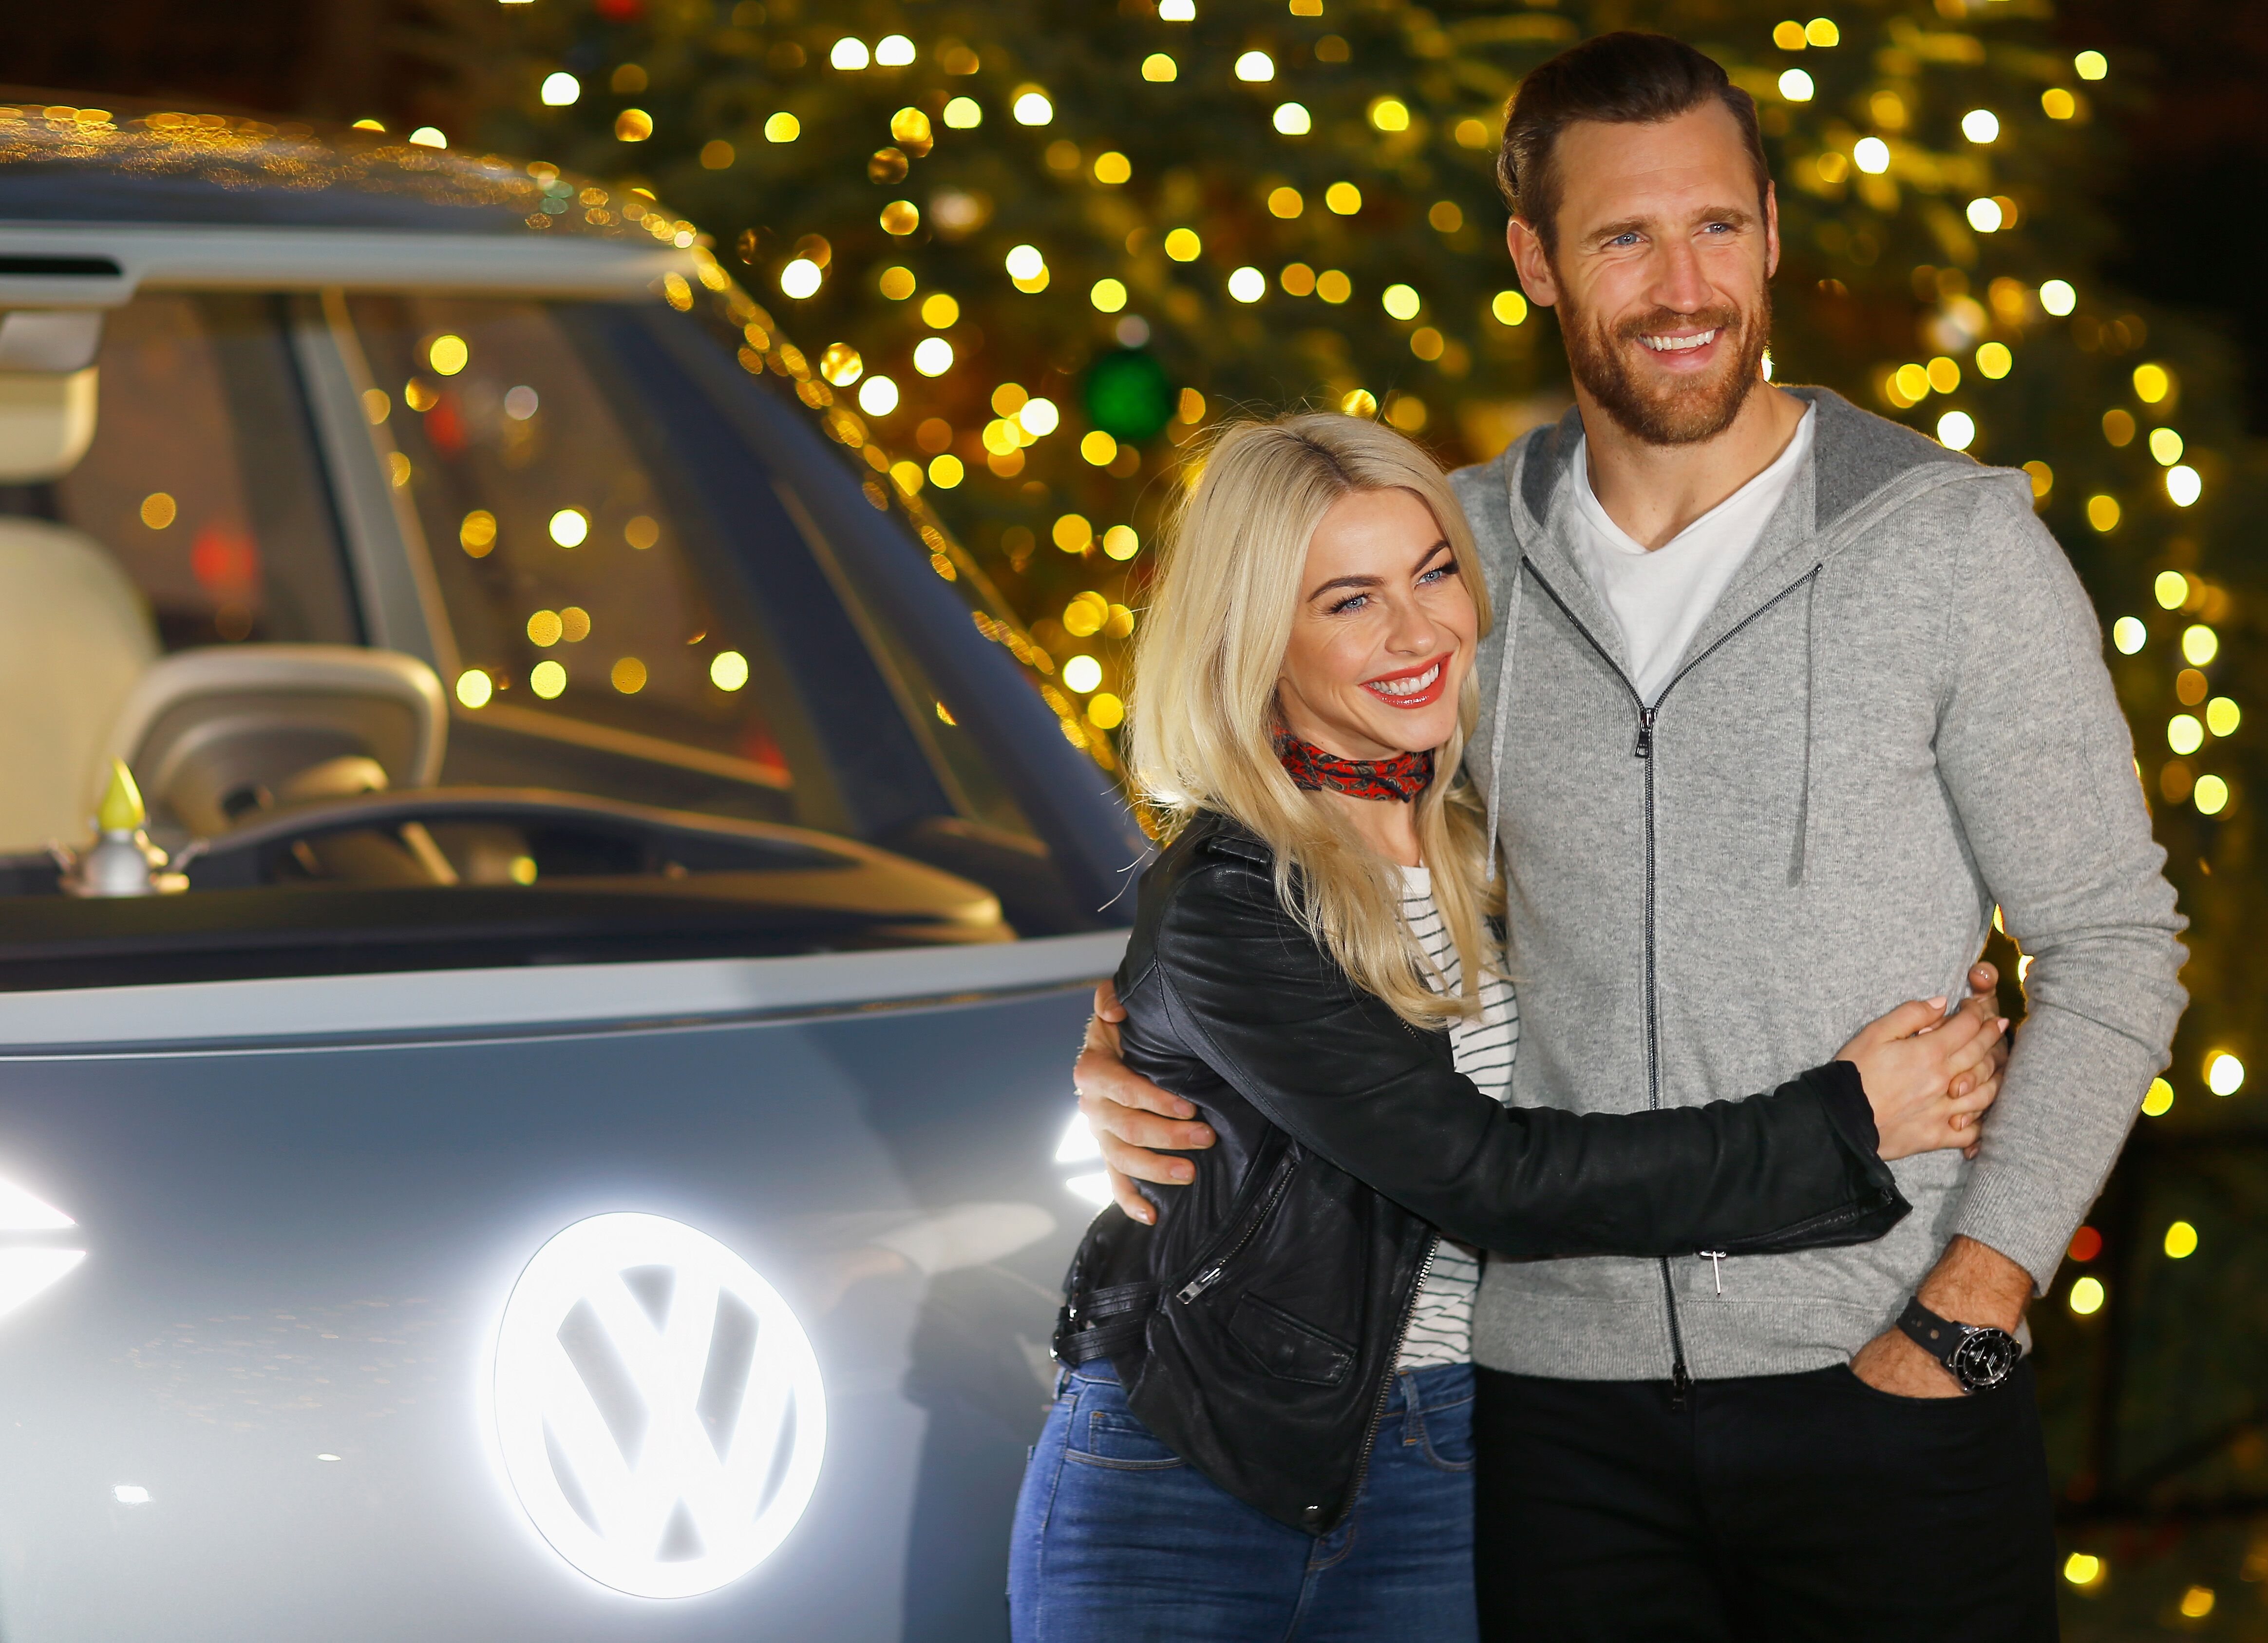 Brooks Laich and Julianne Hough at the Volkswagen Holiday Drive-In Event in Los Angeles in December 2017 | Source: Getty IMages.